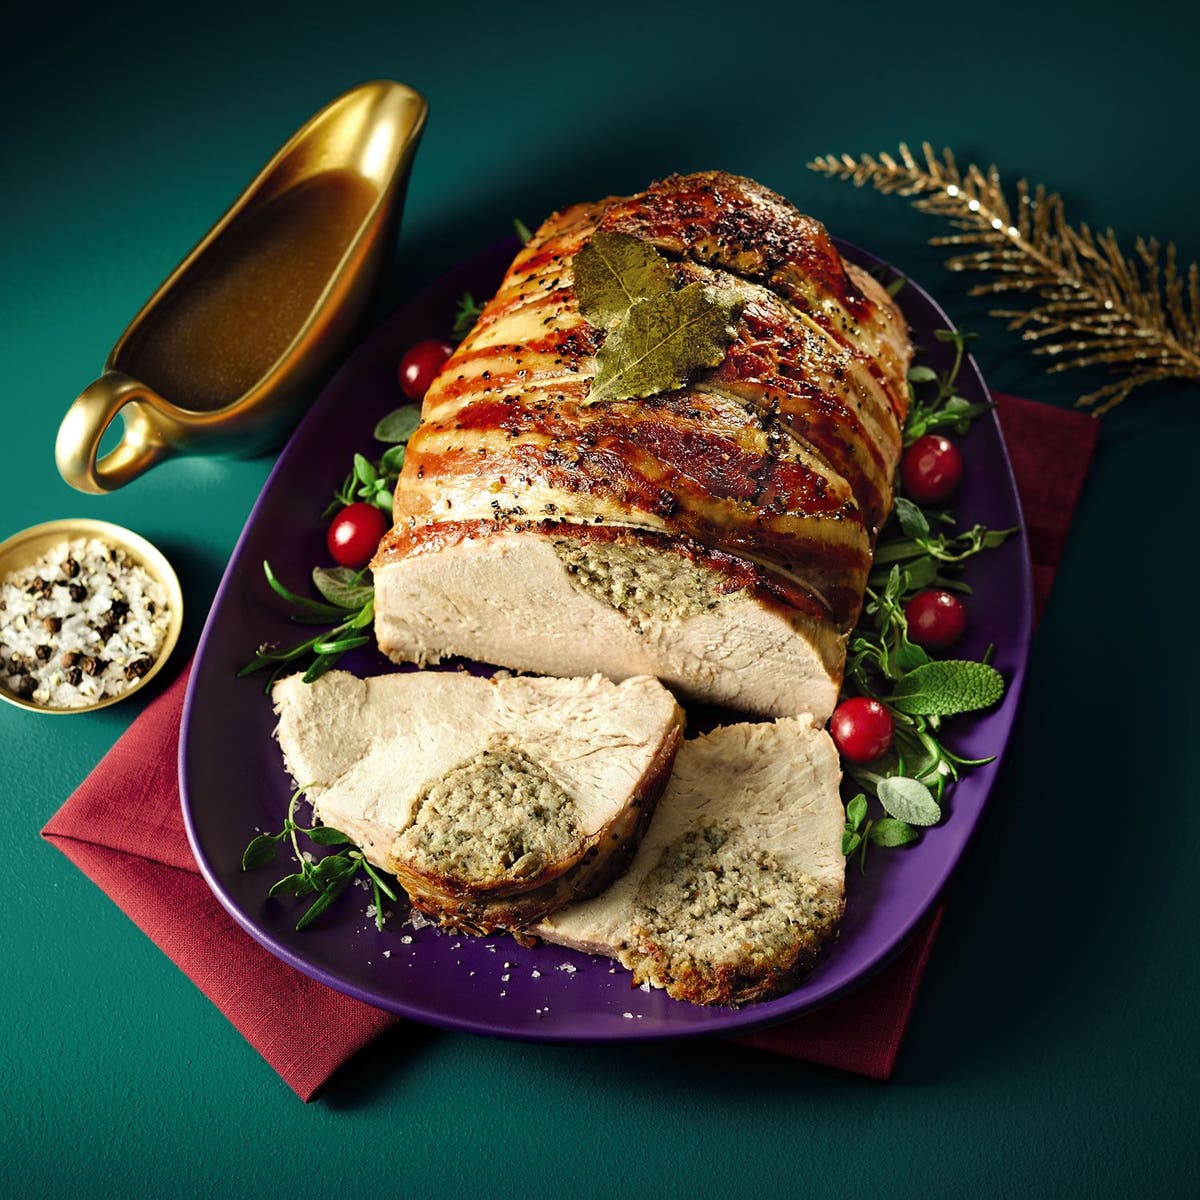 Finalise your Christmas feast and last-minute gifting with Aldi